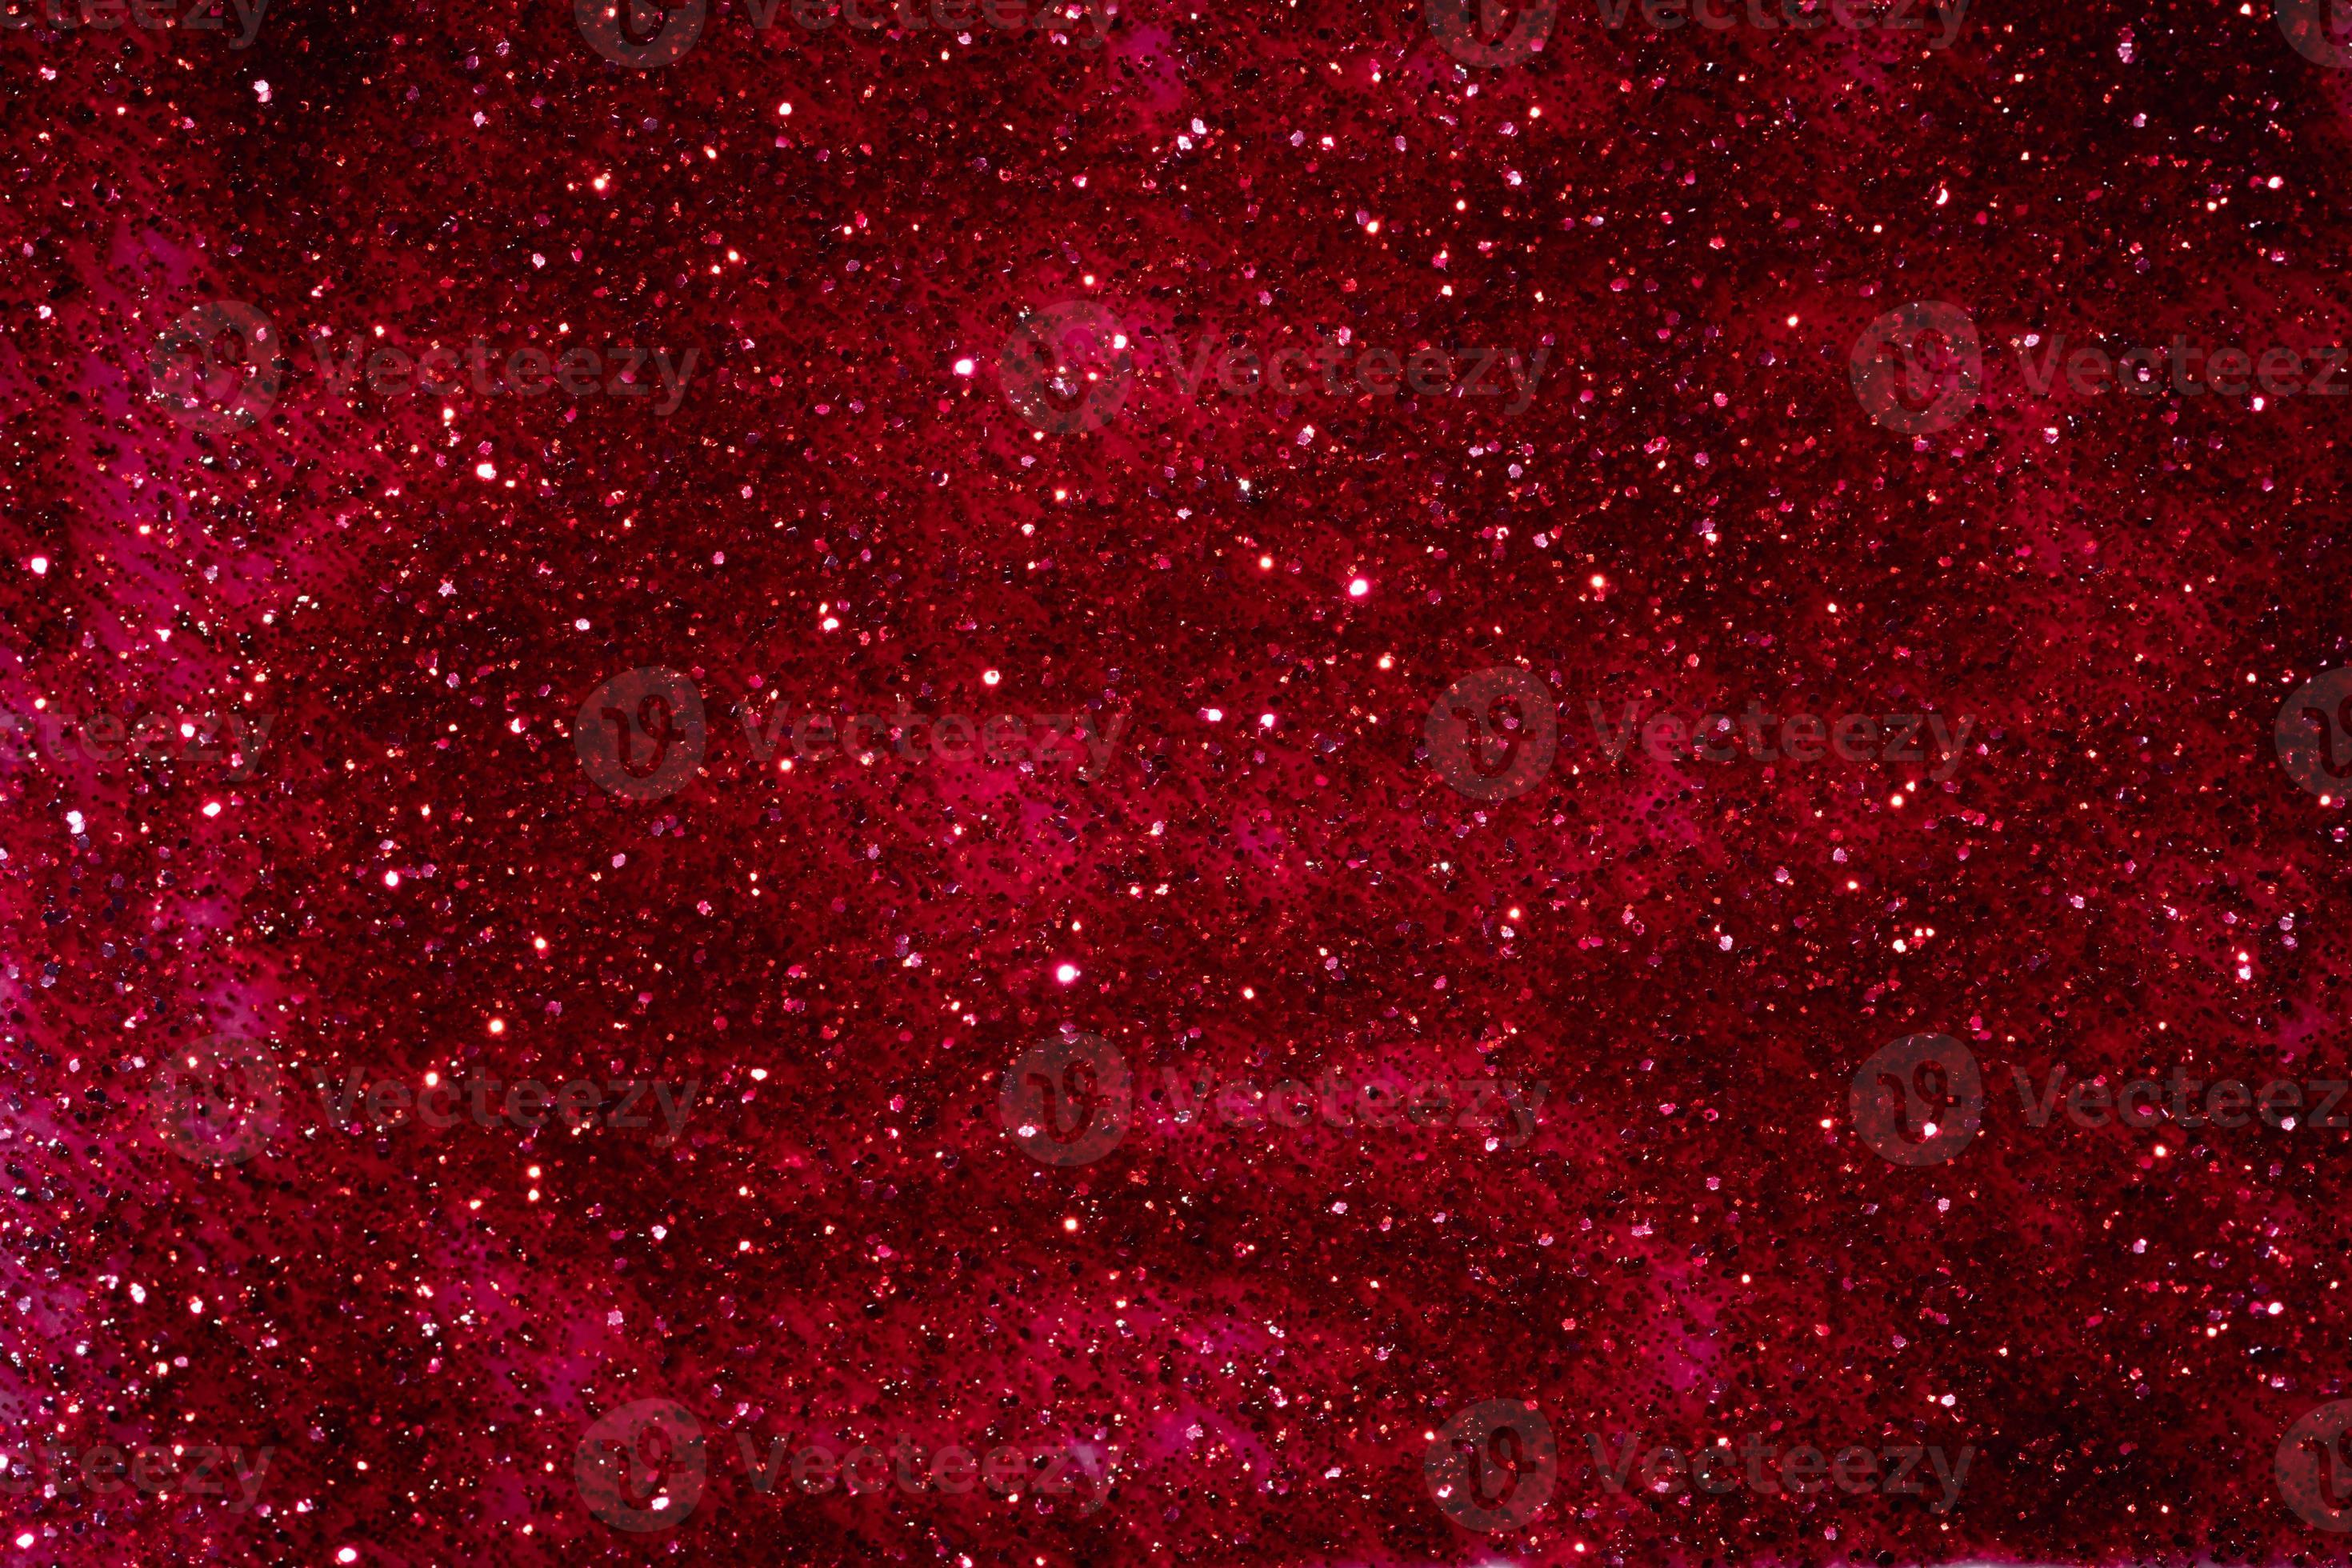 Dark red glitter texture, Free backgrounds and textures